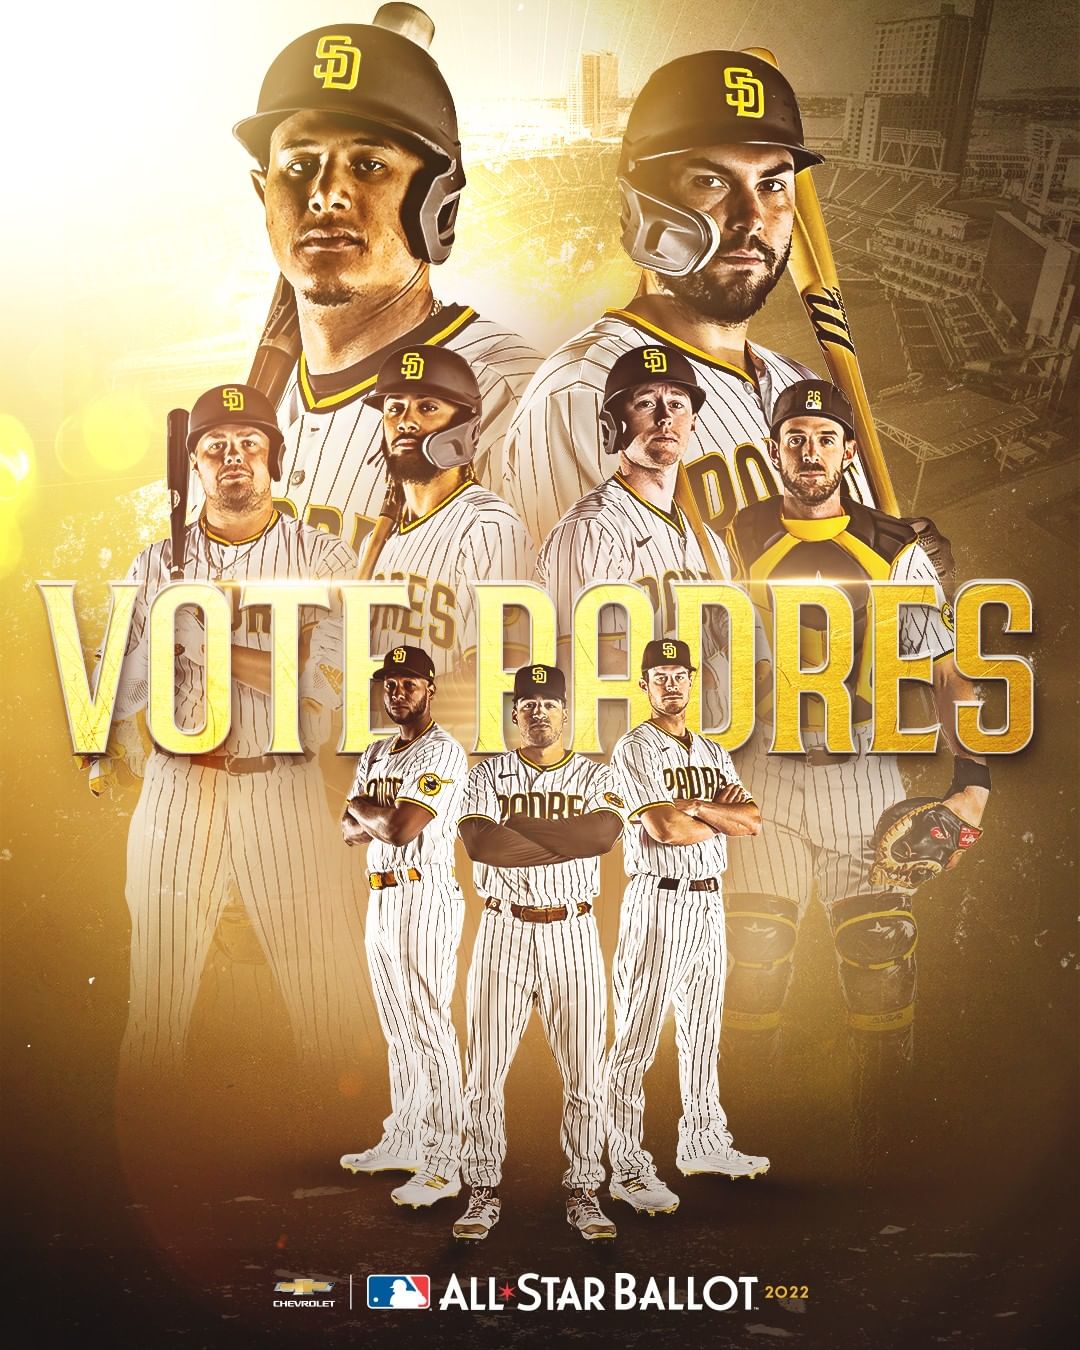 To do list: Wake up  #VotePadres 5x per day...